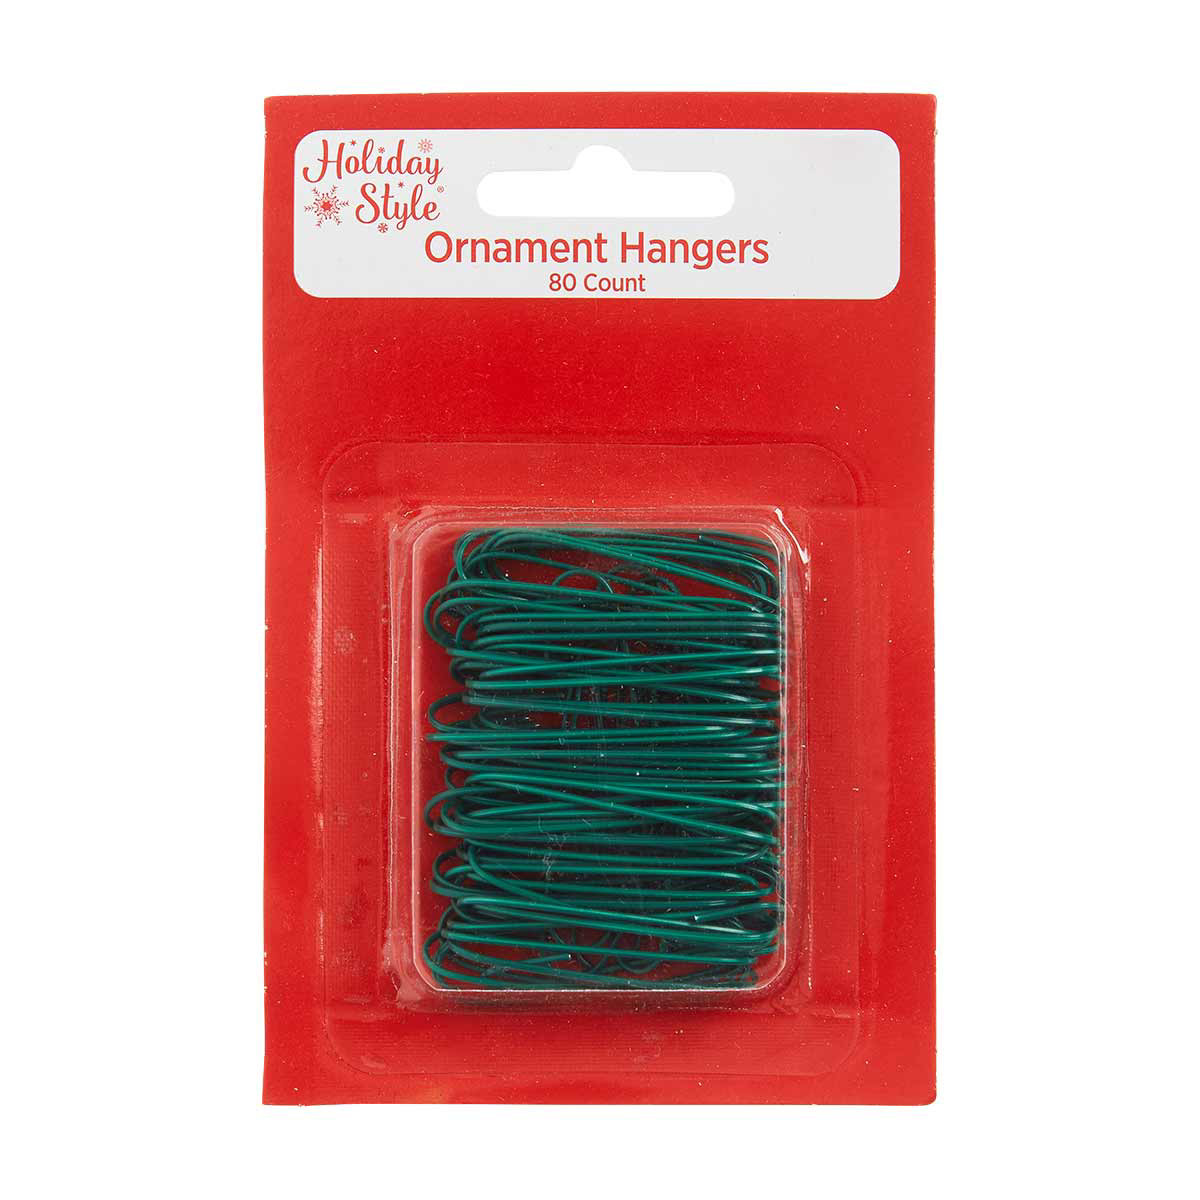 Old World Christmas Box of 100 Green Ornament Hangers 1441 Decoration Hooks